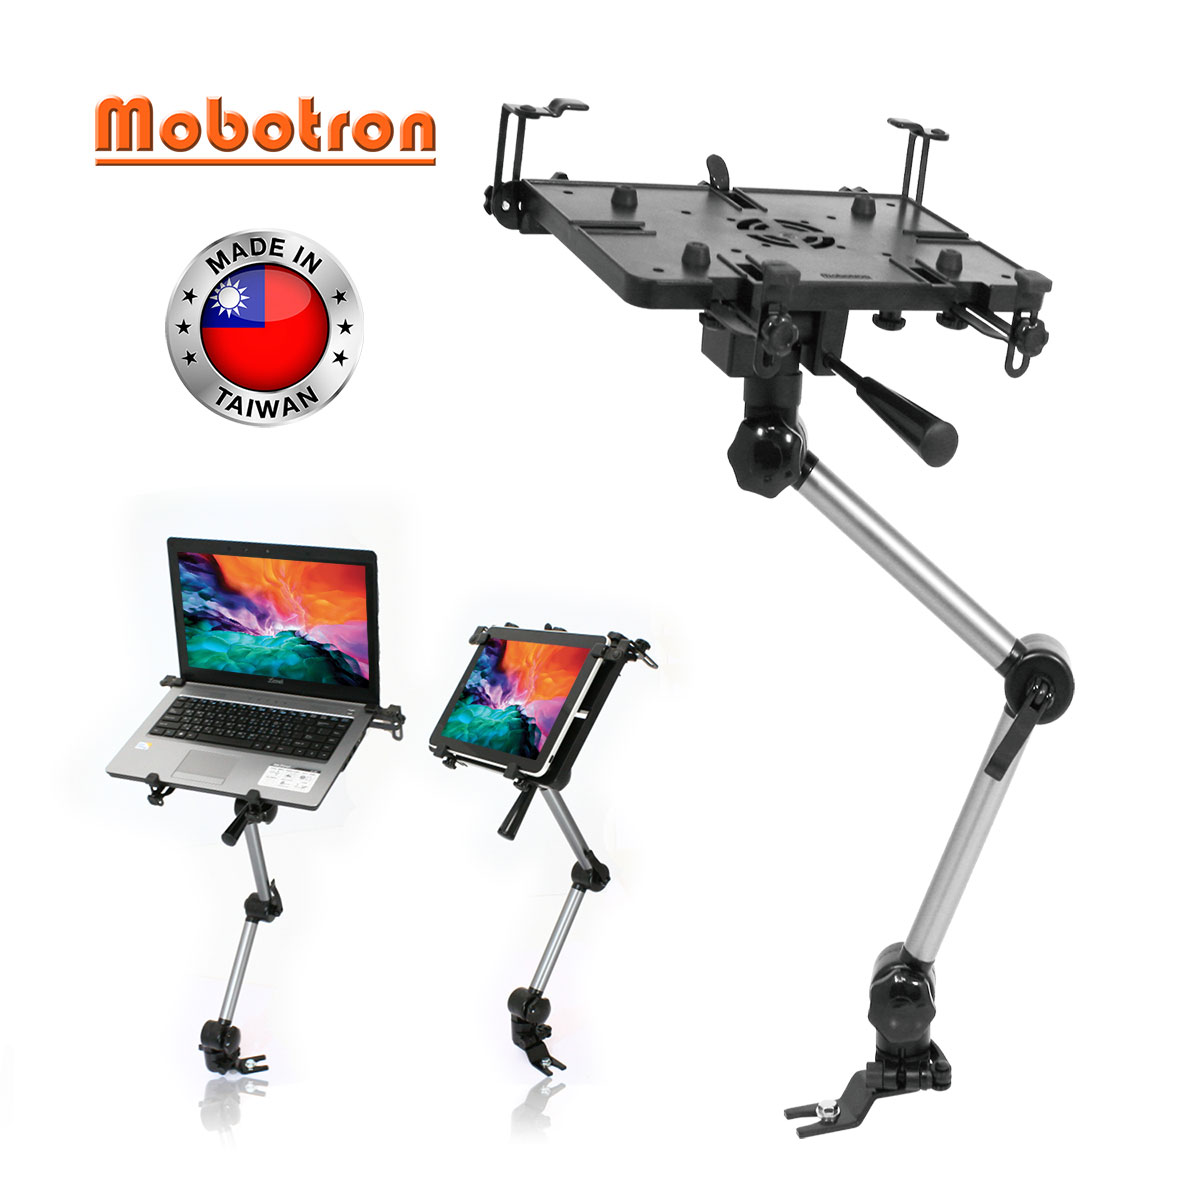 Mobotron Truck Laptop Mount and Tablet Mount